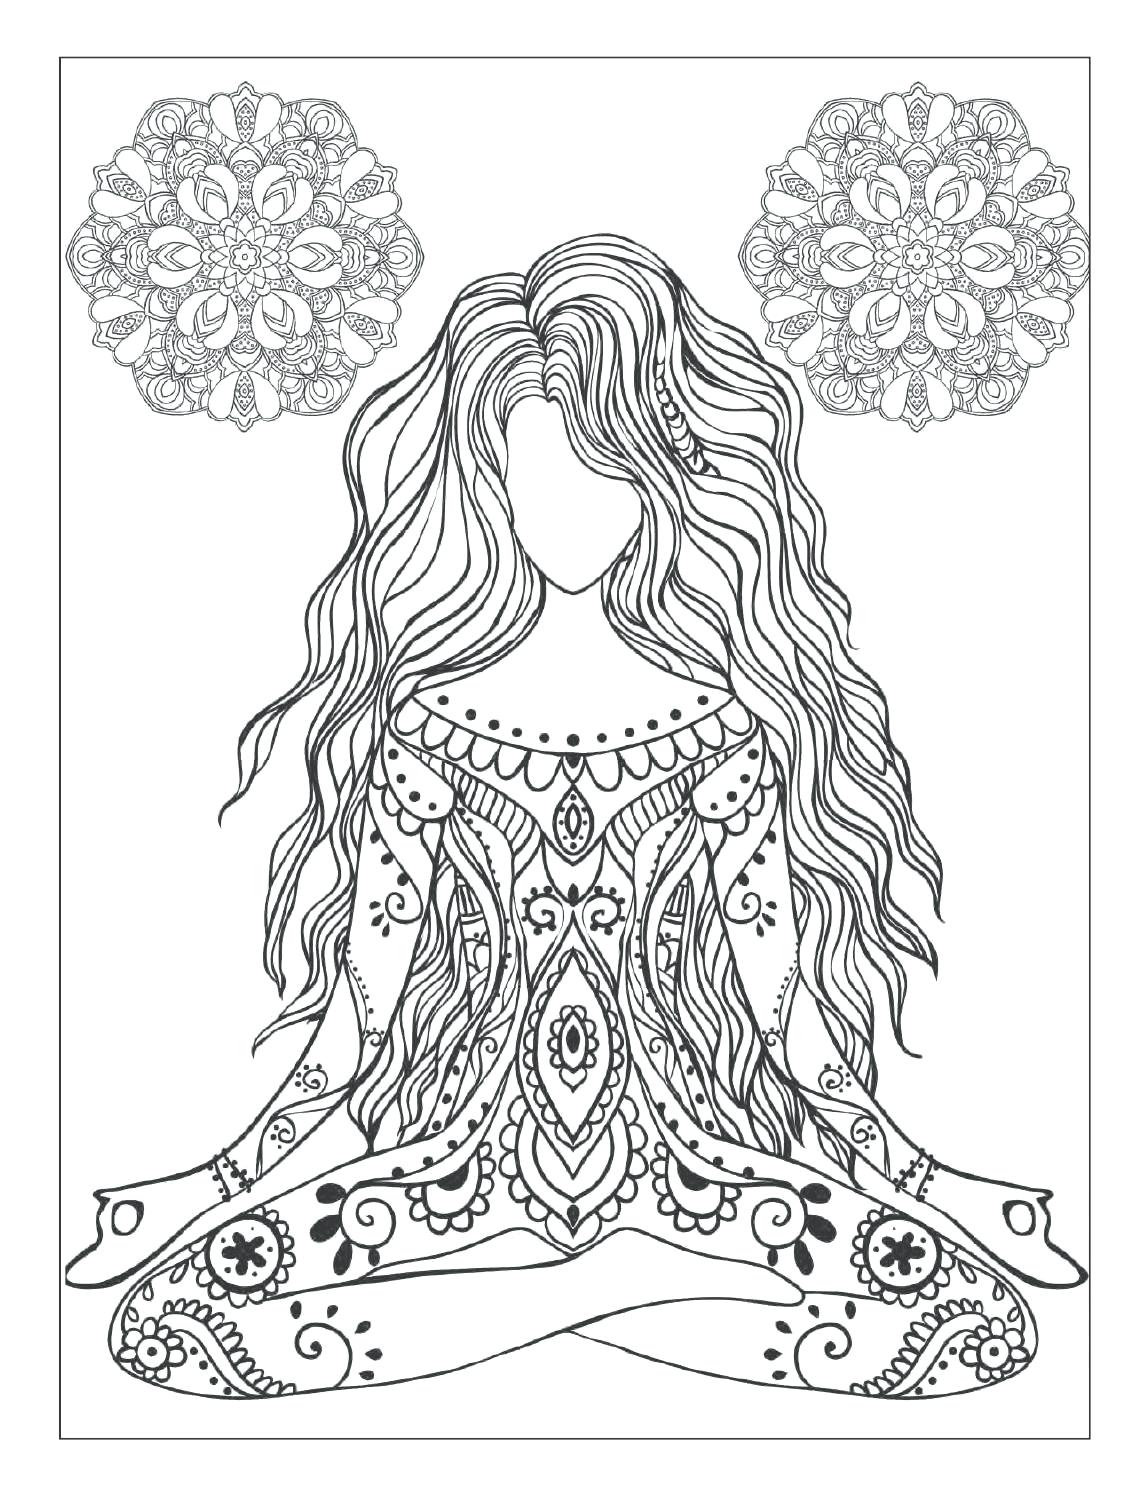 Chakra Coloring Pages at GetDrawings Free download